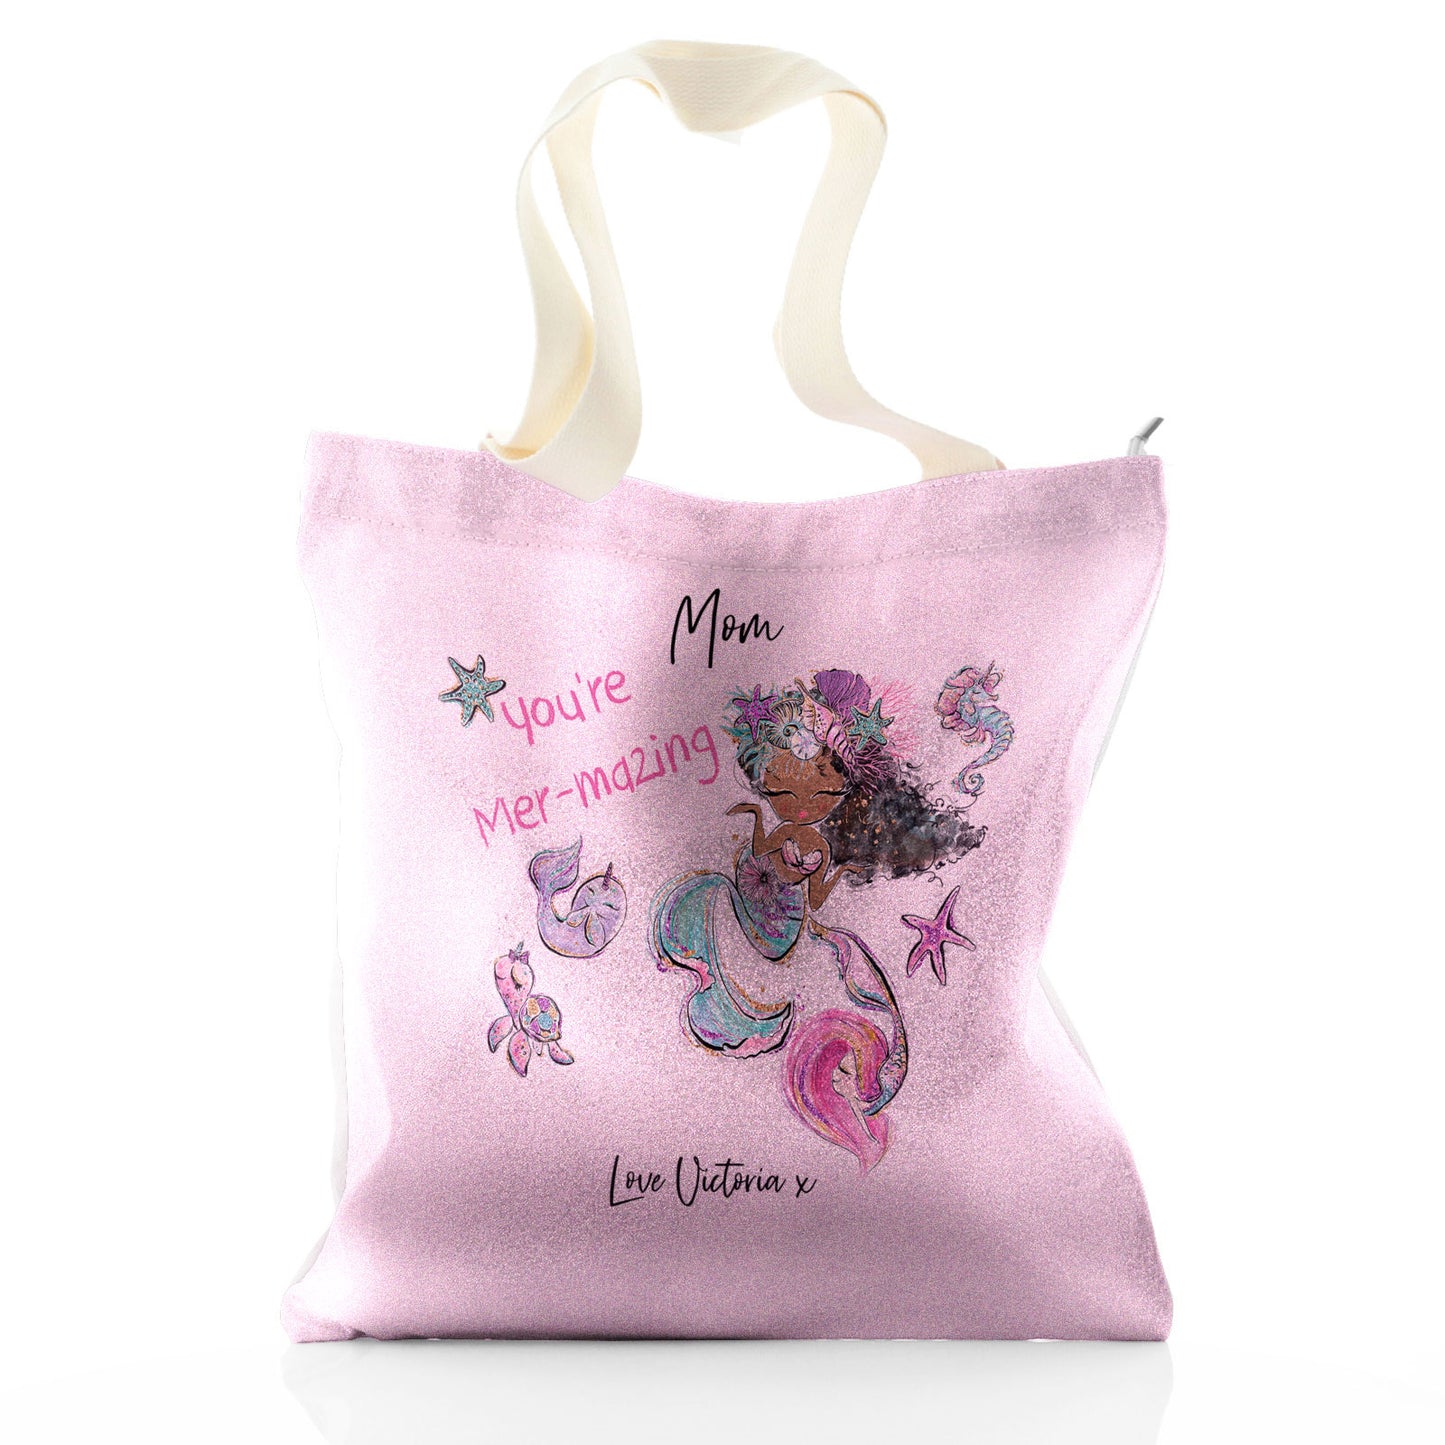 Personalised Glitter Tote Bag with Stylish Text and Mermaid Love Message